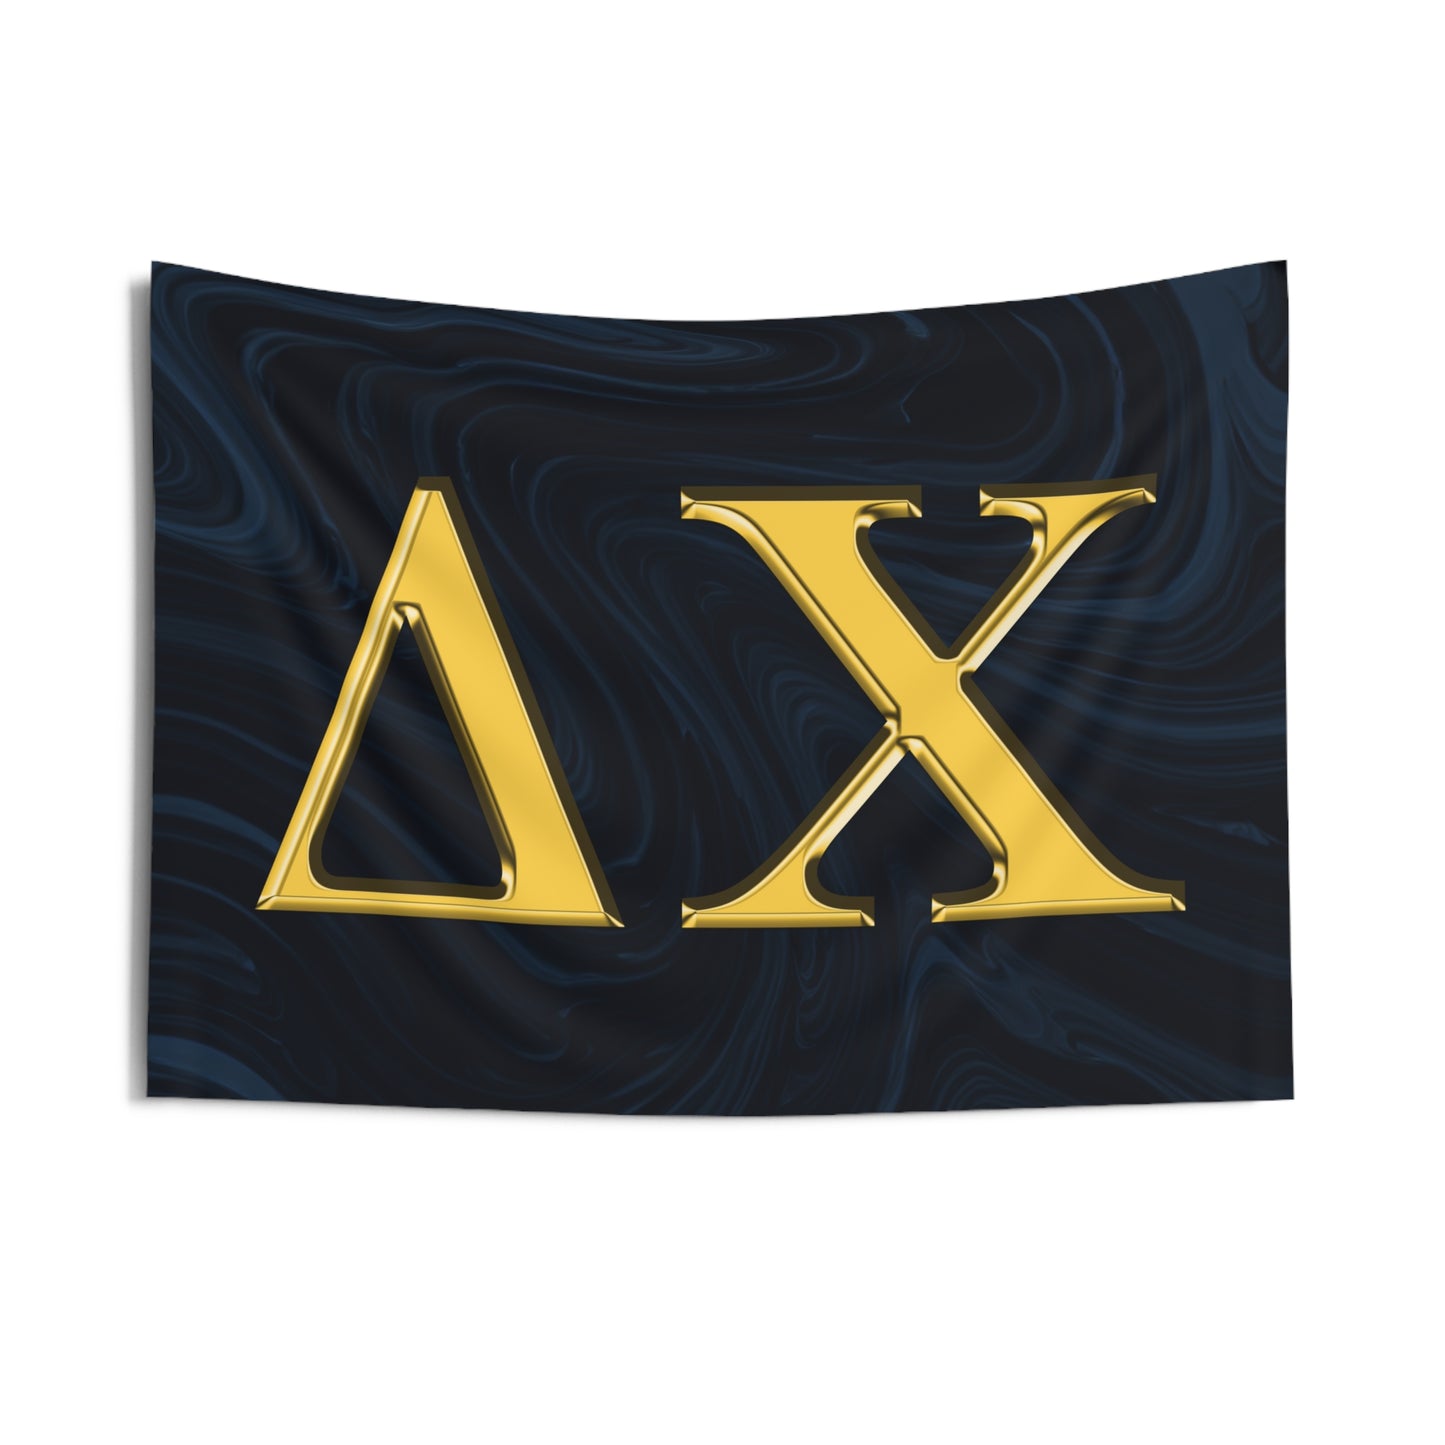 Delta Chi Wall Flag with Navy & Gold Letters Fraternity Home Decoration for Dorms & Apartments